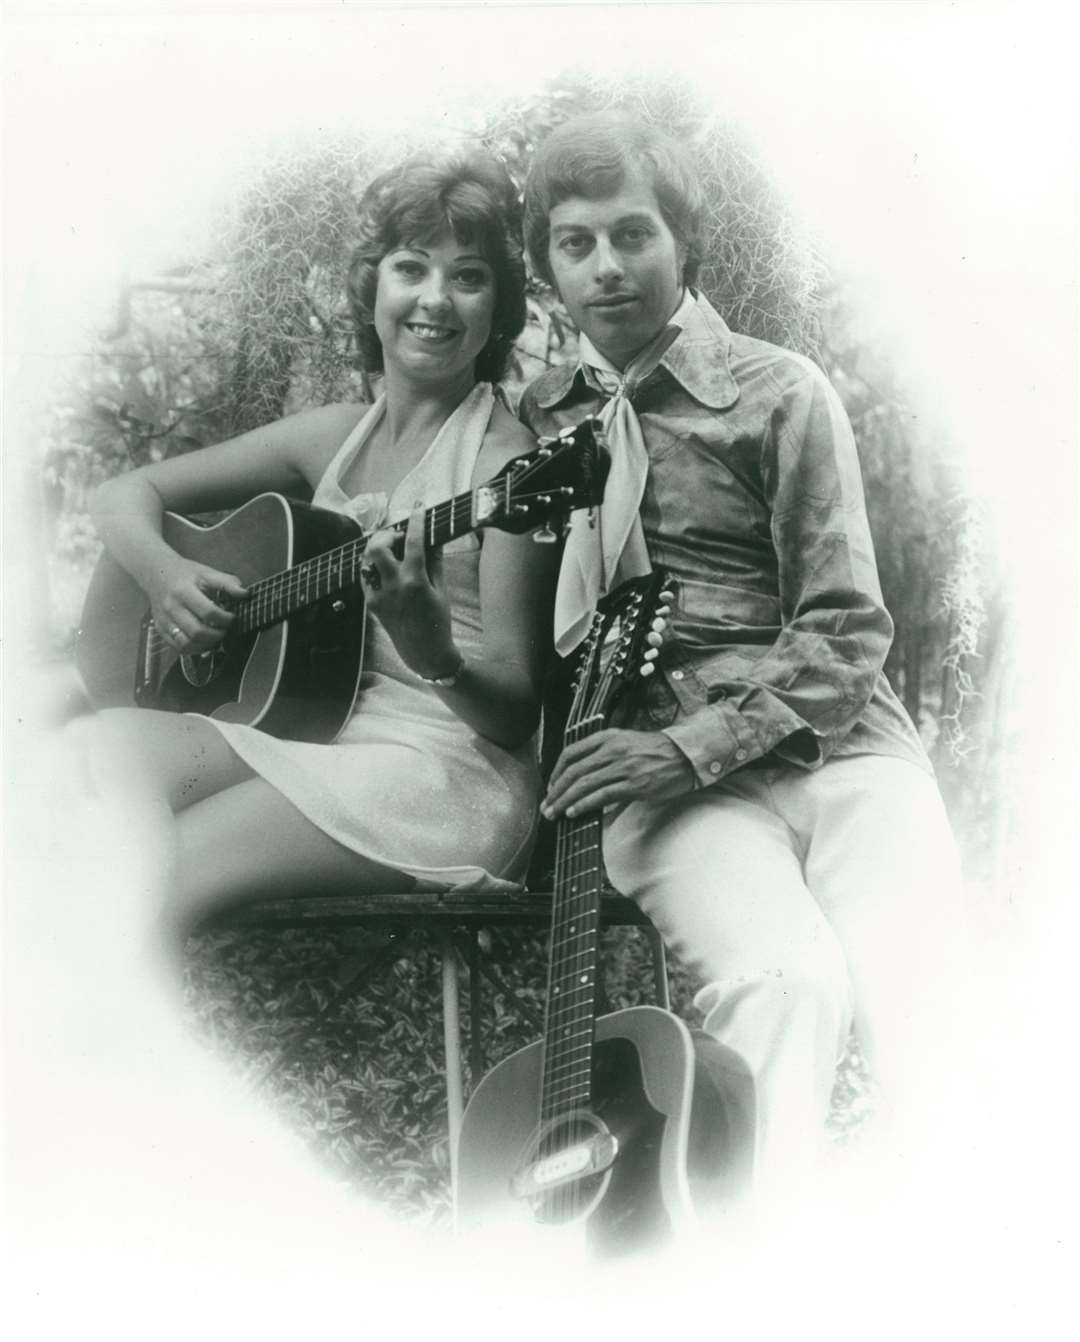 Peter and Mary in Bermuda, 1974